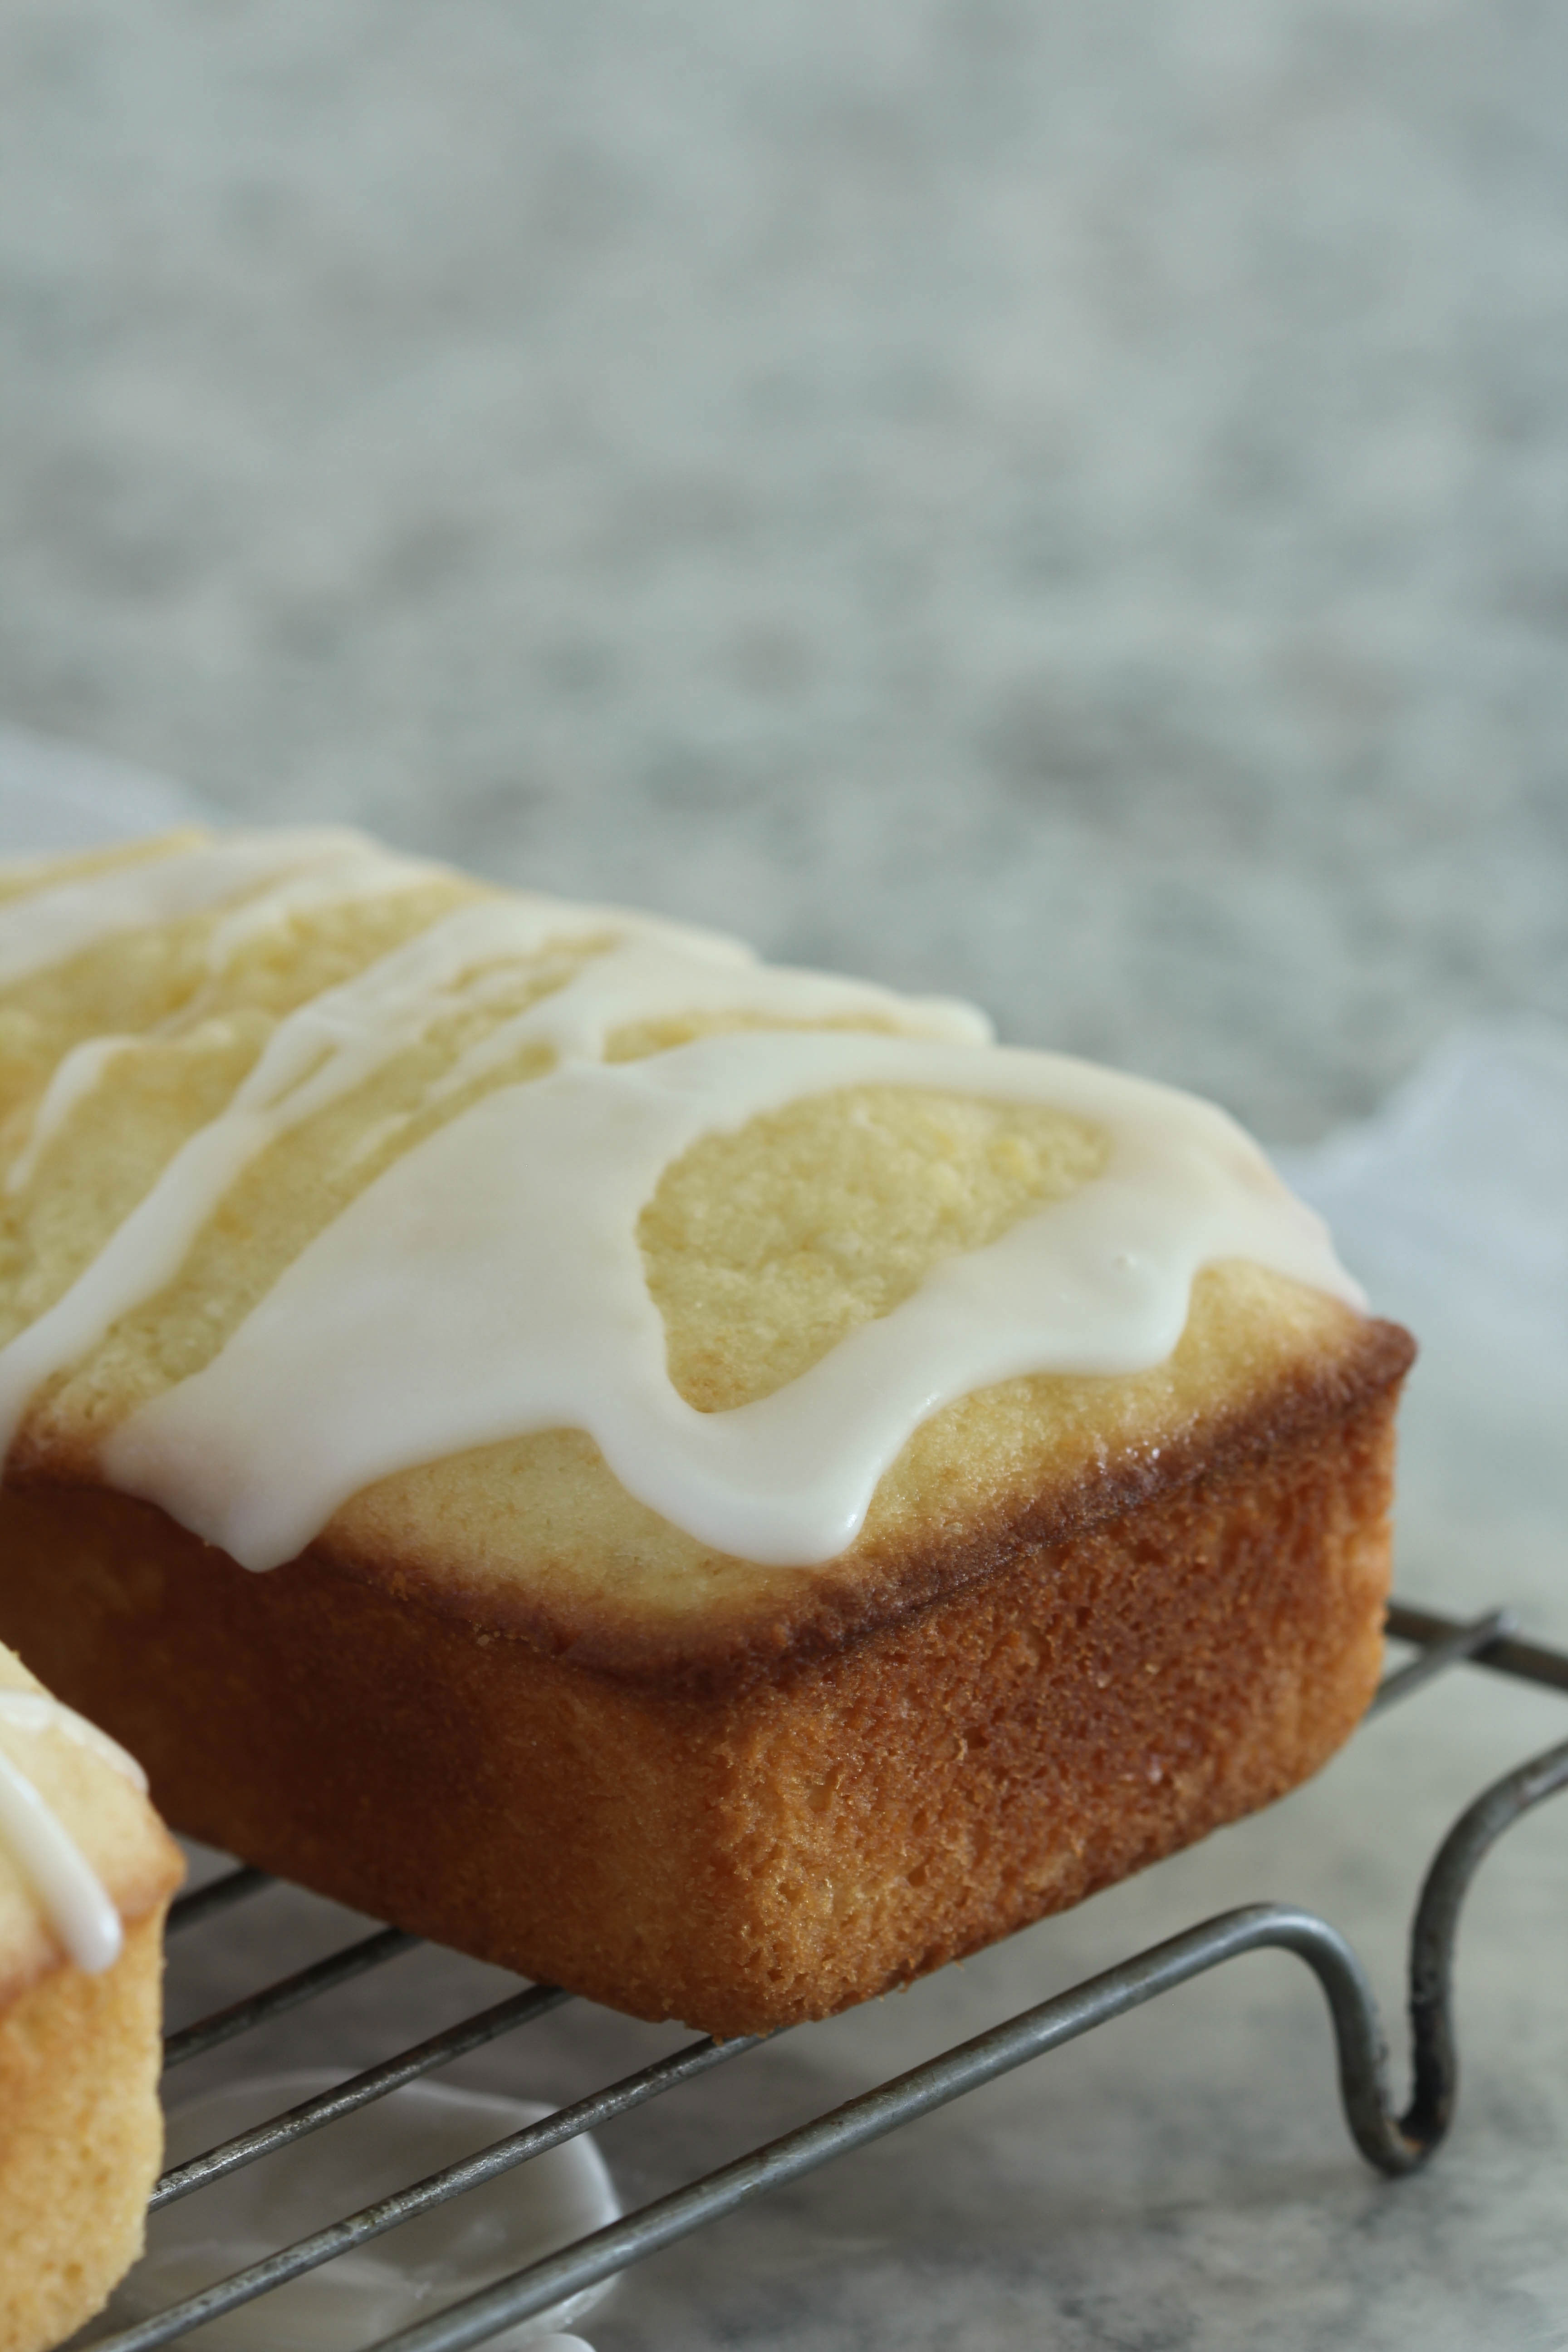 Looking for a non-chocolate, crowd pleasing dessert? Try these Lemon Cakes in either two loaves or make them as individual treats! You will love them!